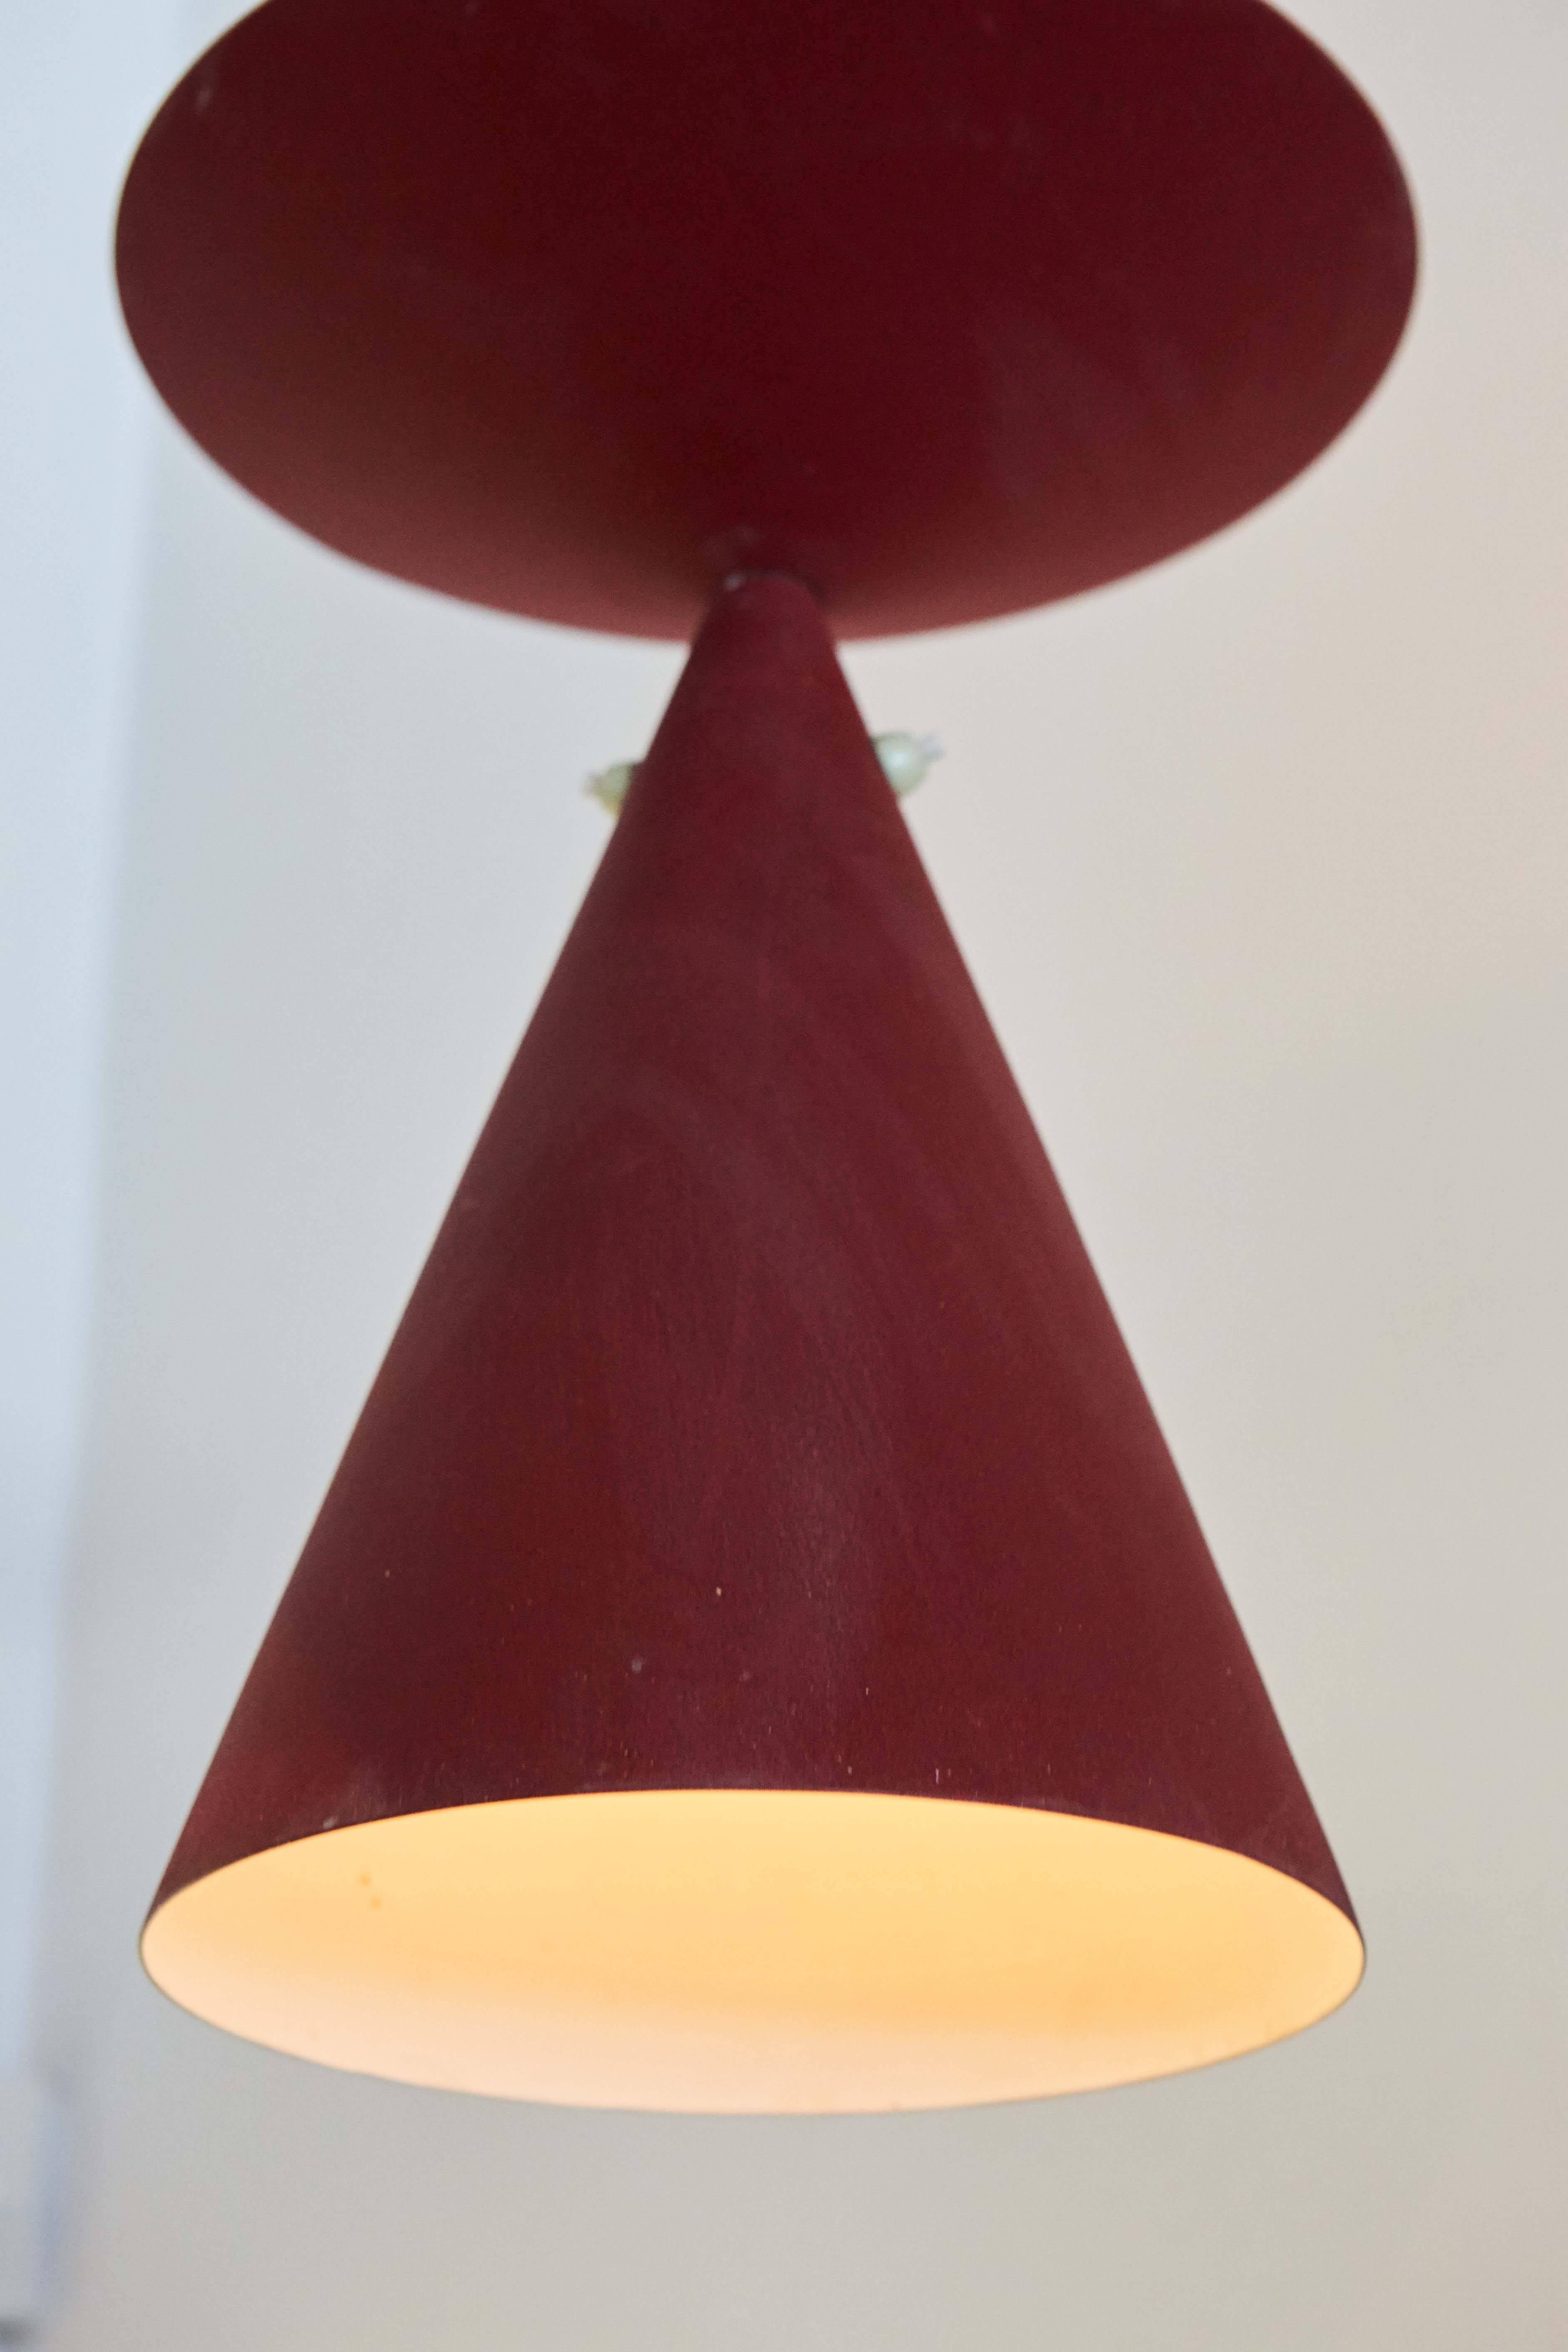 Bertil Brisborg's rare ceiling pendant, only produced in black or ox blood red.